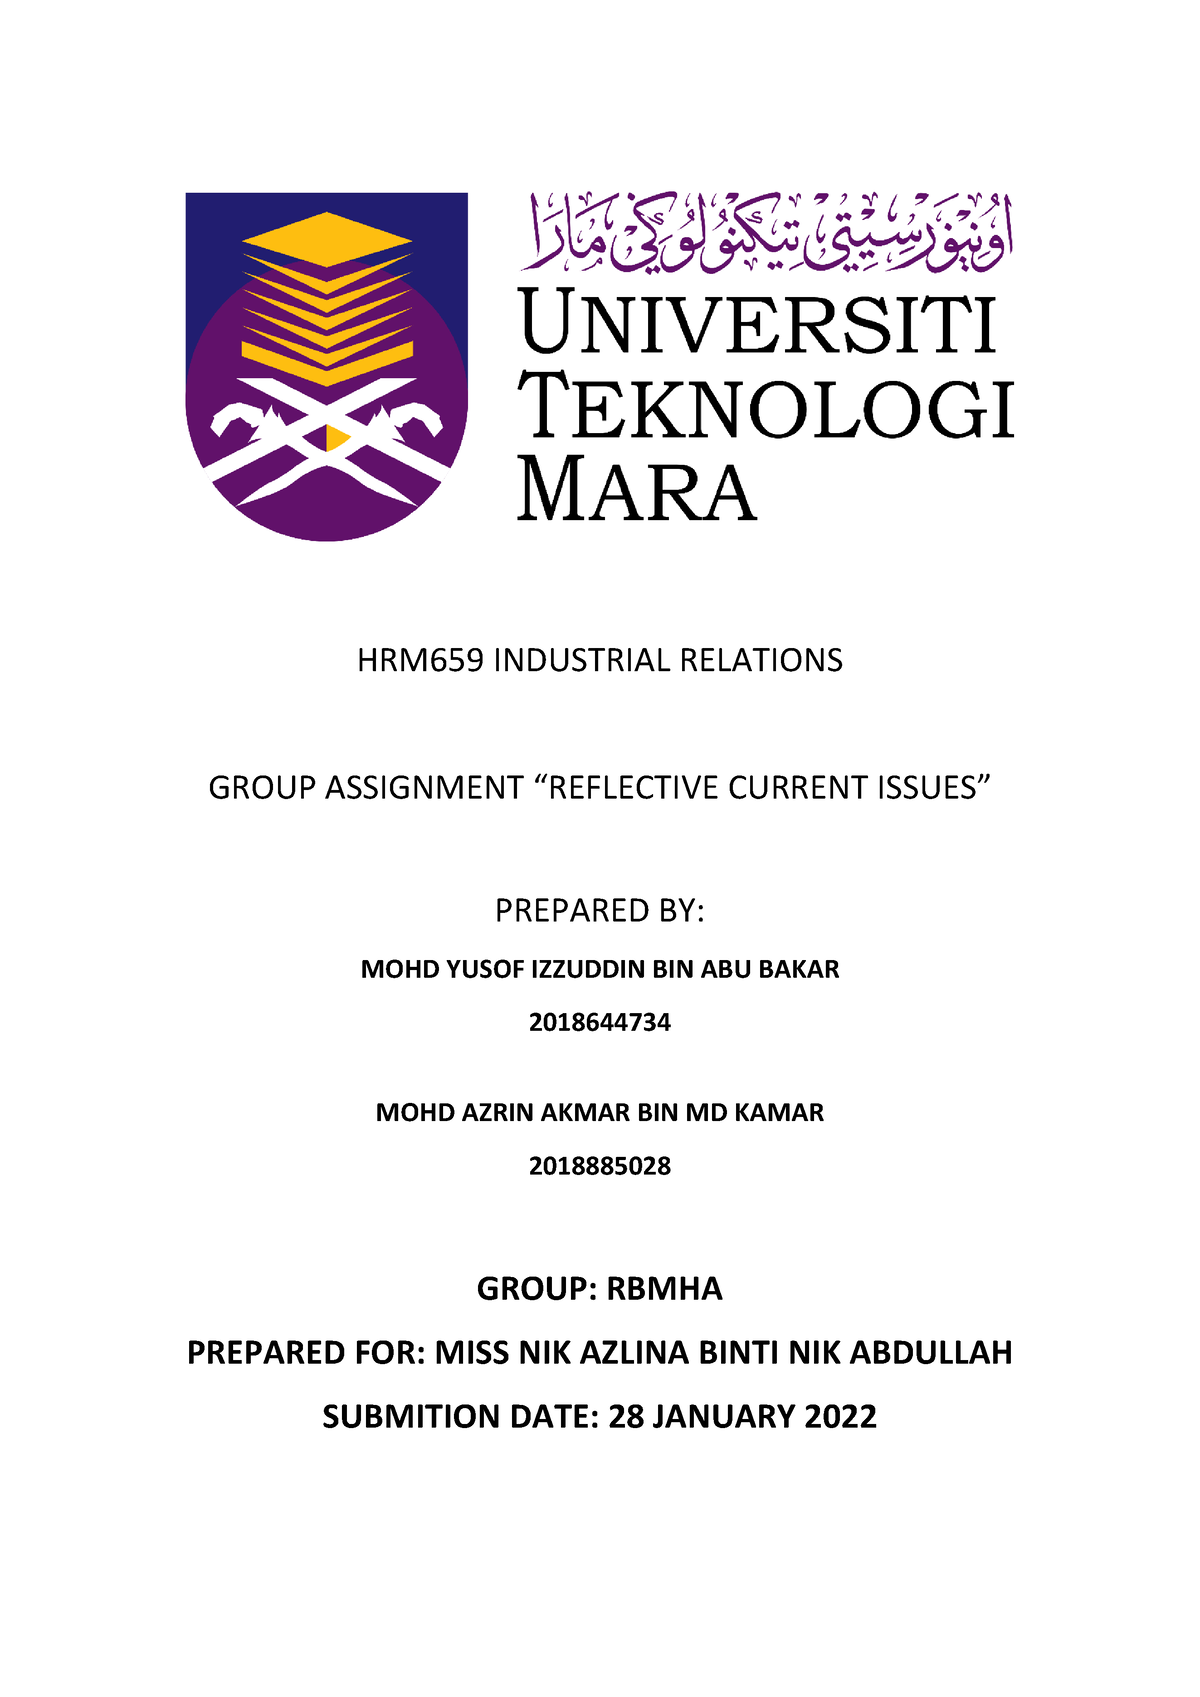 hrm659 group assignment